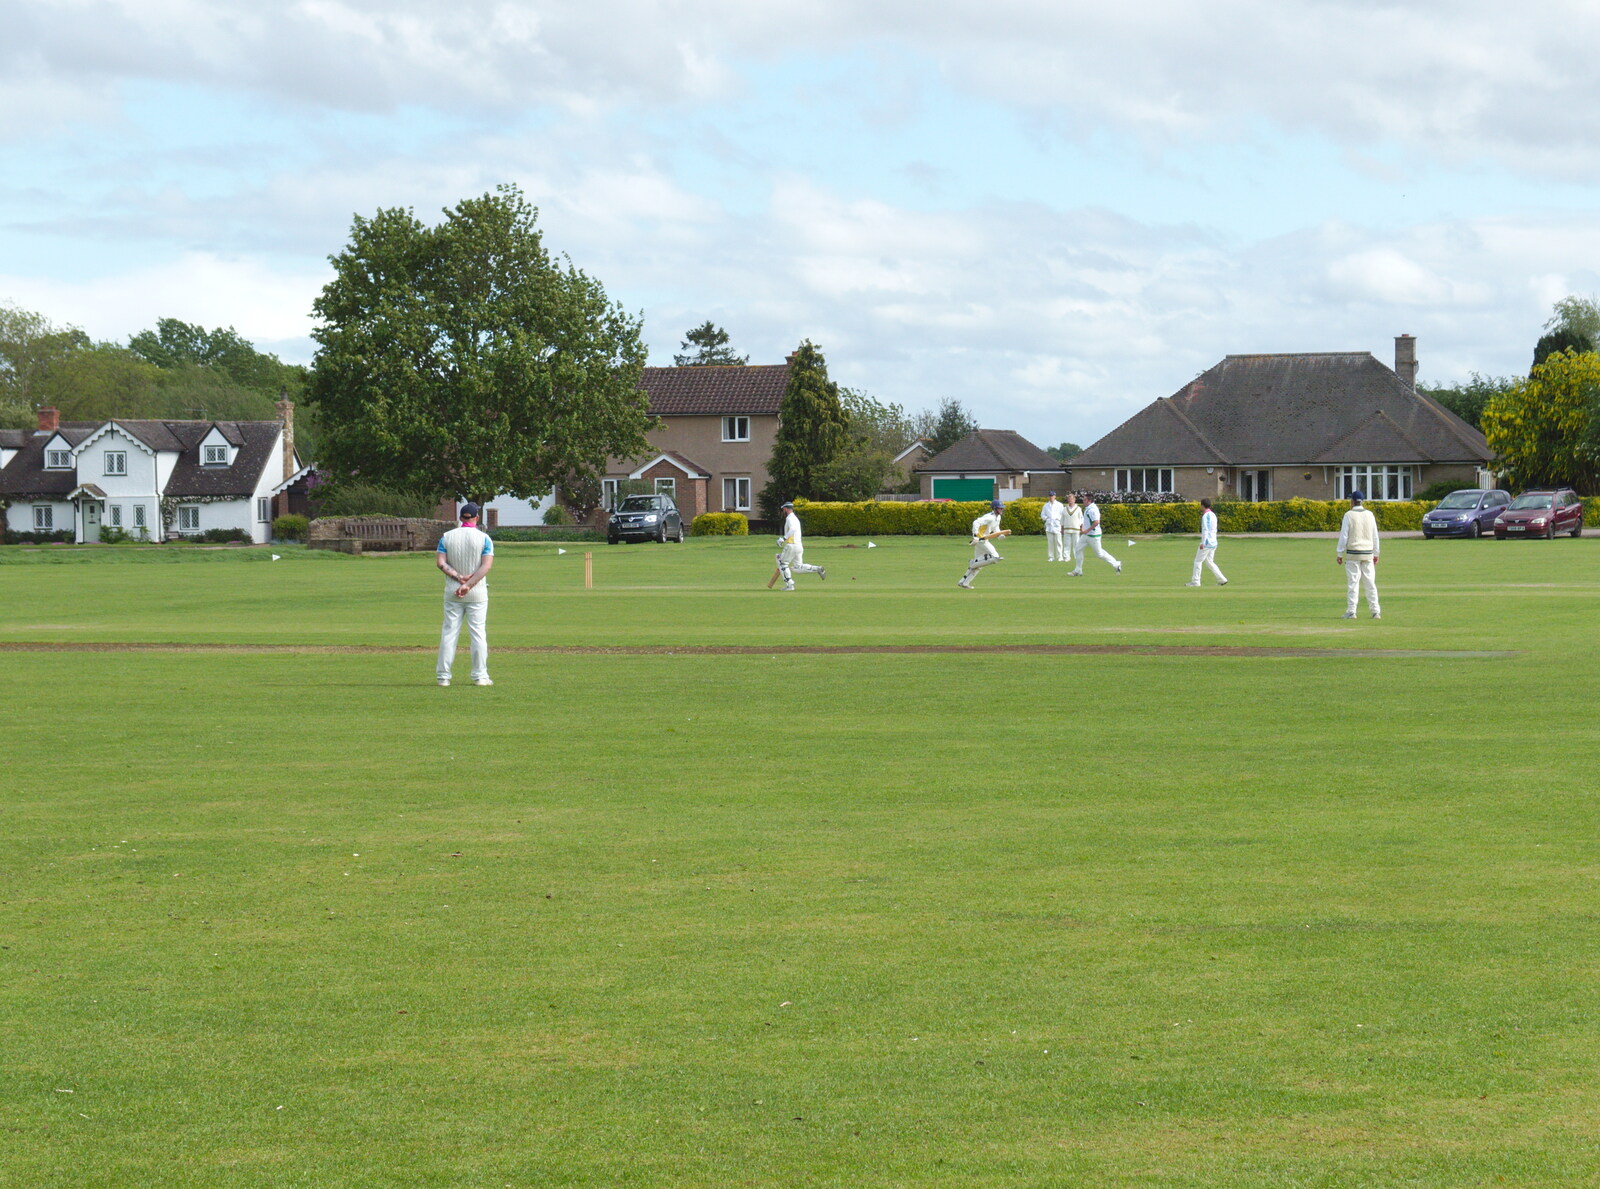 There's a village cricket match in full swing from A Return to Bedford: the BSCC Annual Weekend Away, Shefford, Bedfordshire - 10th May 2014